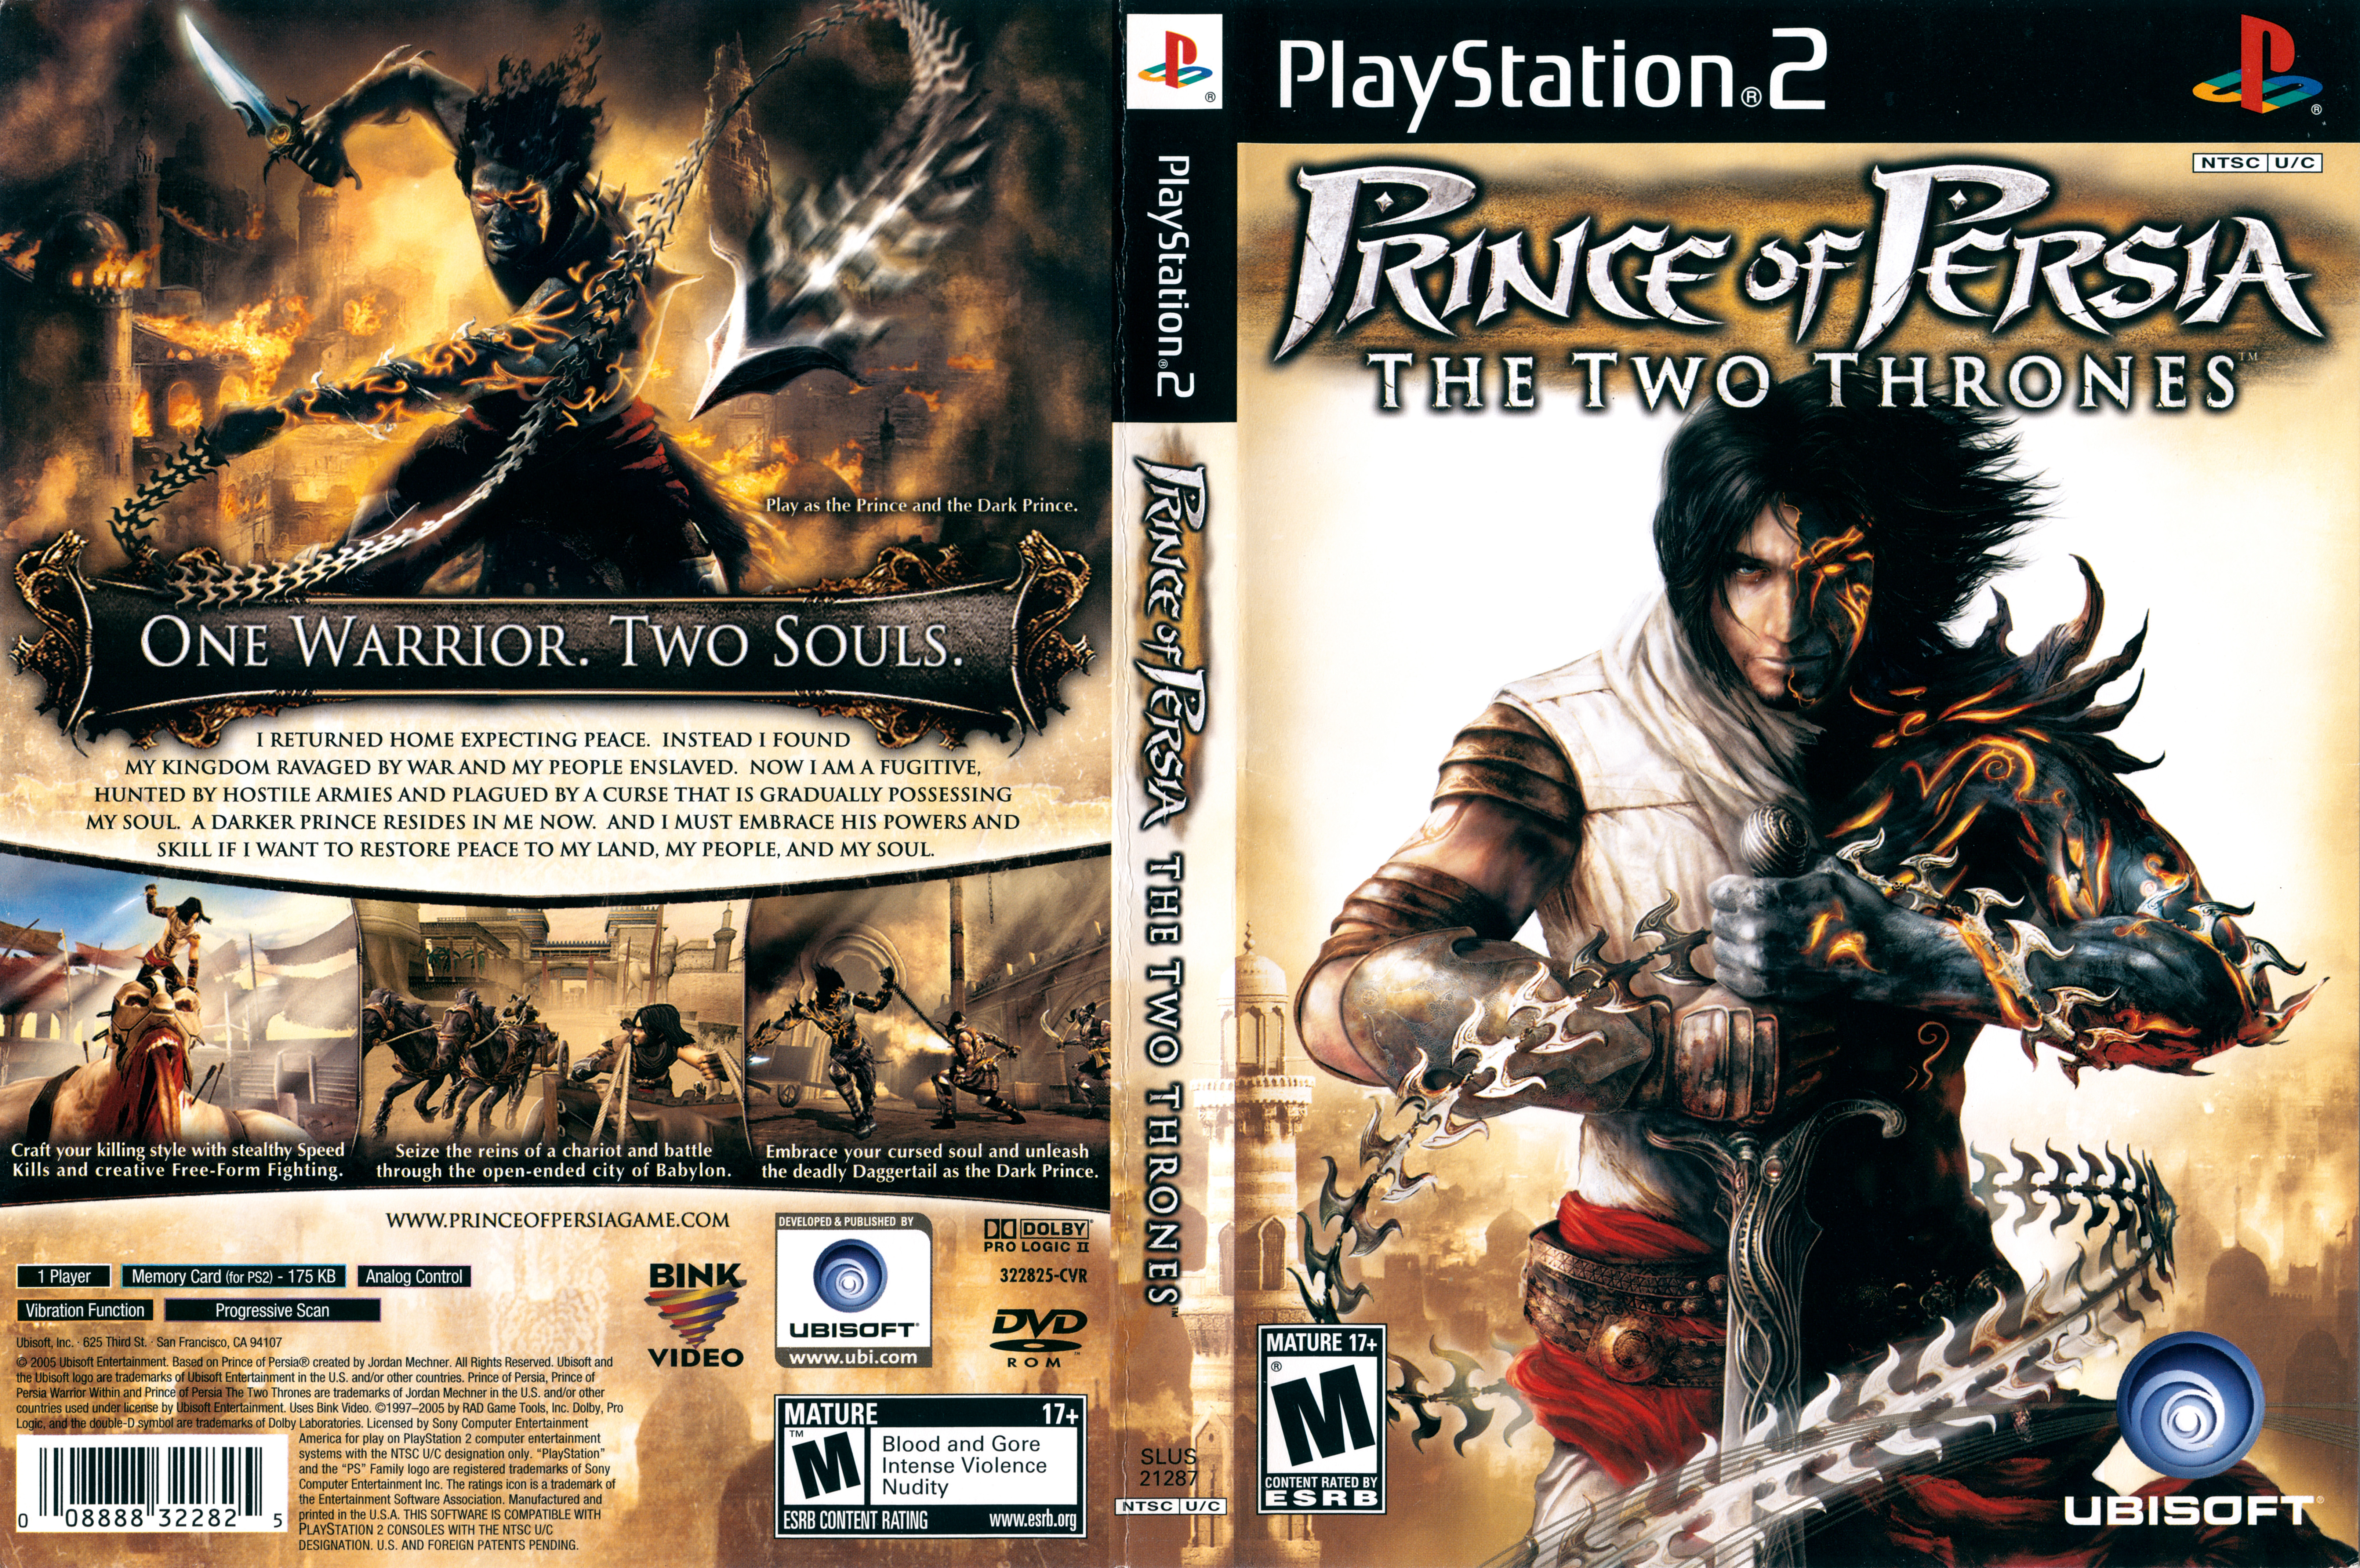 Prince of Persia: Warrior Within - PS2 - Super Retro - Playstation 2